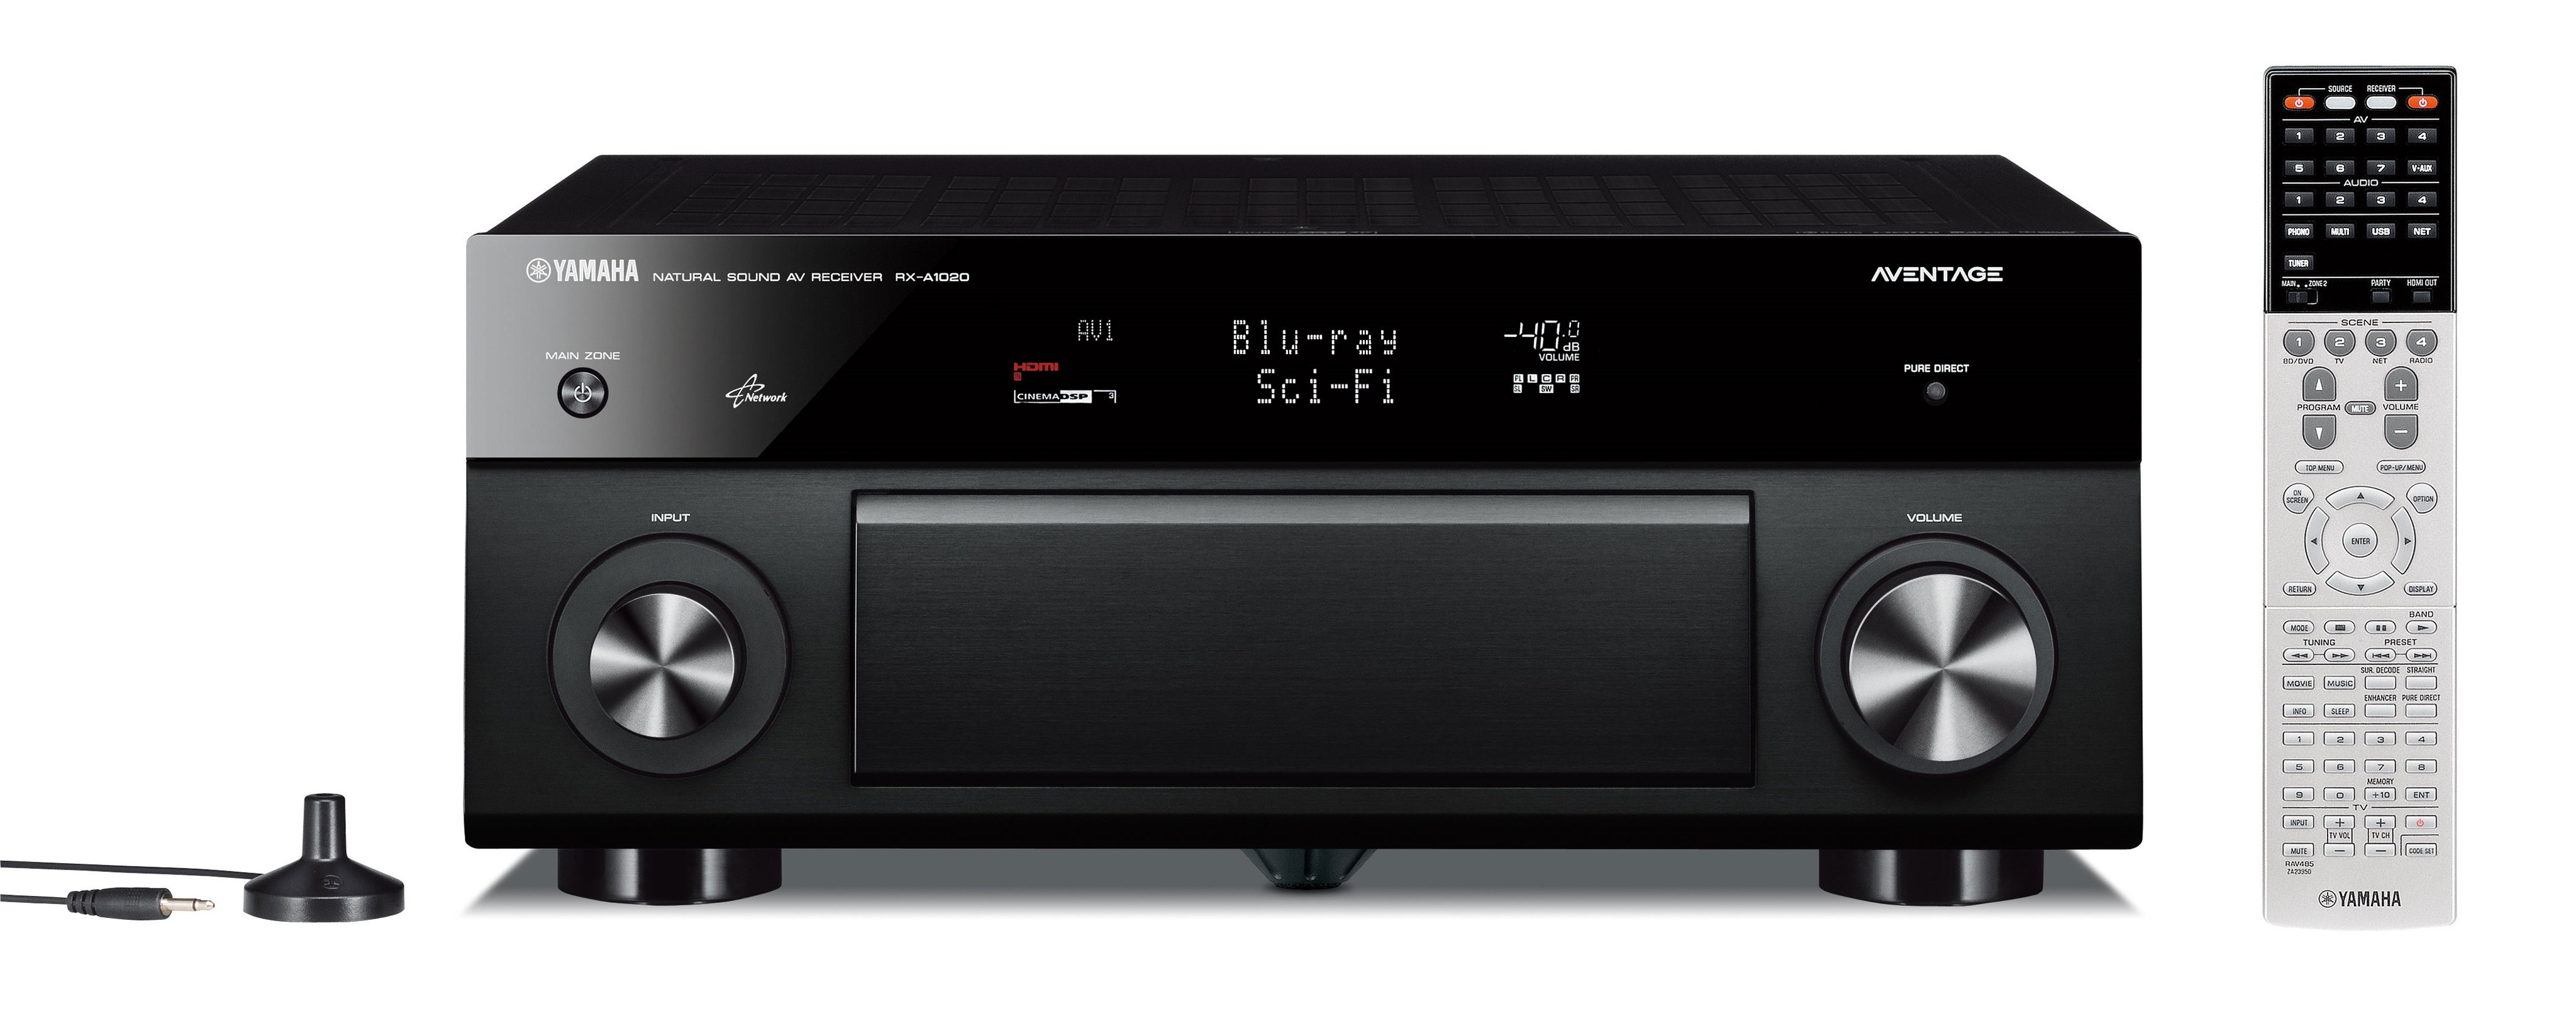 RX-A1020 - Overview - AV Receivers - Audio & Visual - Products - Yamaha